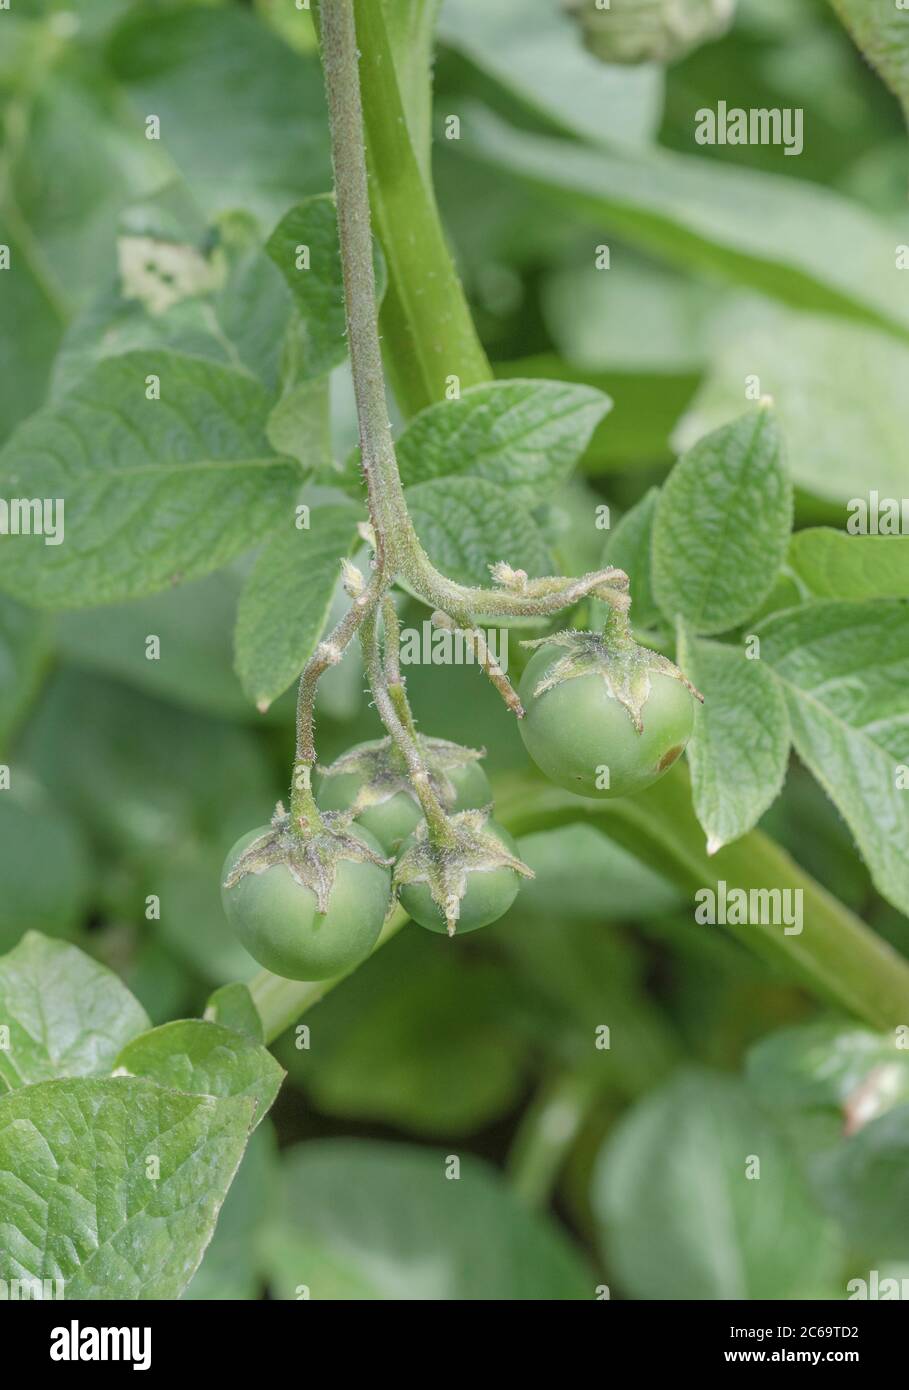 Poisonous toxic green potato berries, cherries, fruit or seed pods close up. These are what form after potato flowers. Plant poisons, poisonous plants Stock Photo